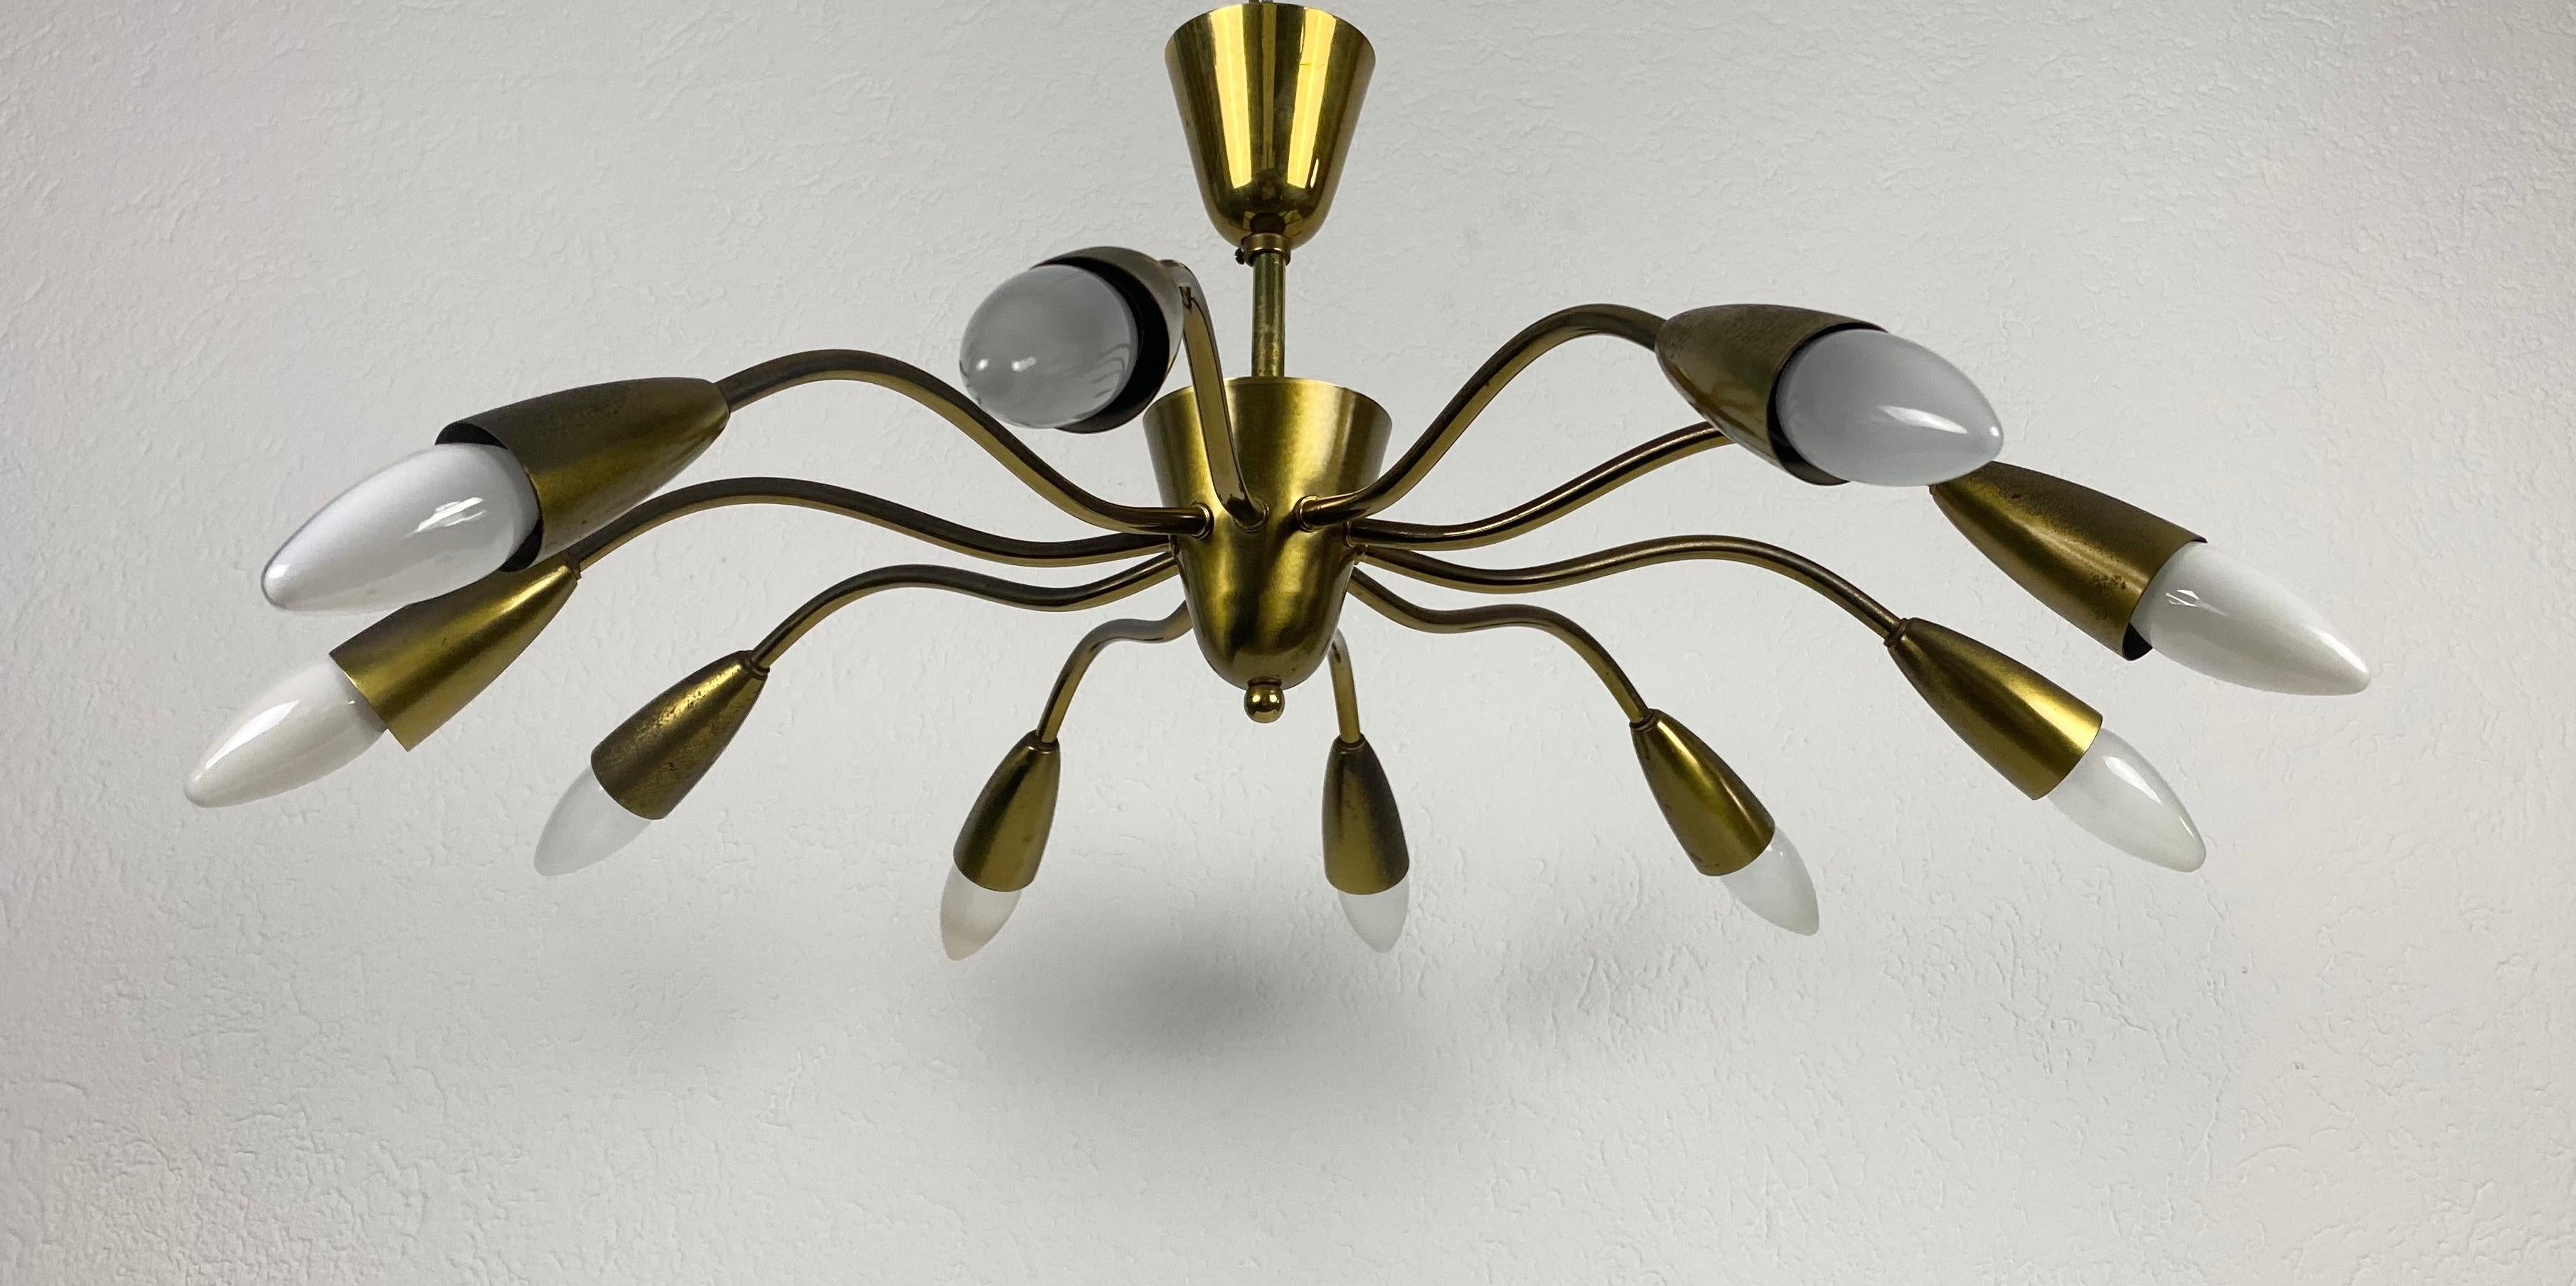 A Sputnik chandelier made in Italy in the 1950s. It is fascinating with its ten brass arms, each of it with an E14 light bulb. The shape of the light is similar to a spider.

The light requires 10 E14 light bulbs. Works with both 120/220V. Good